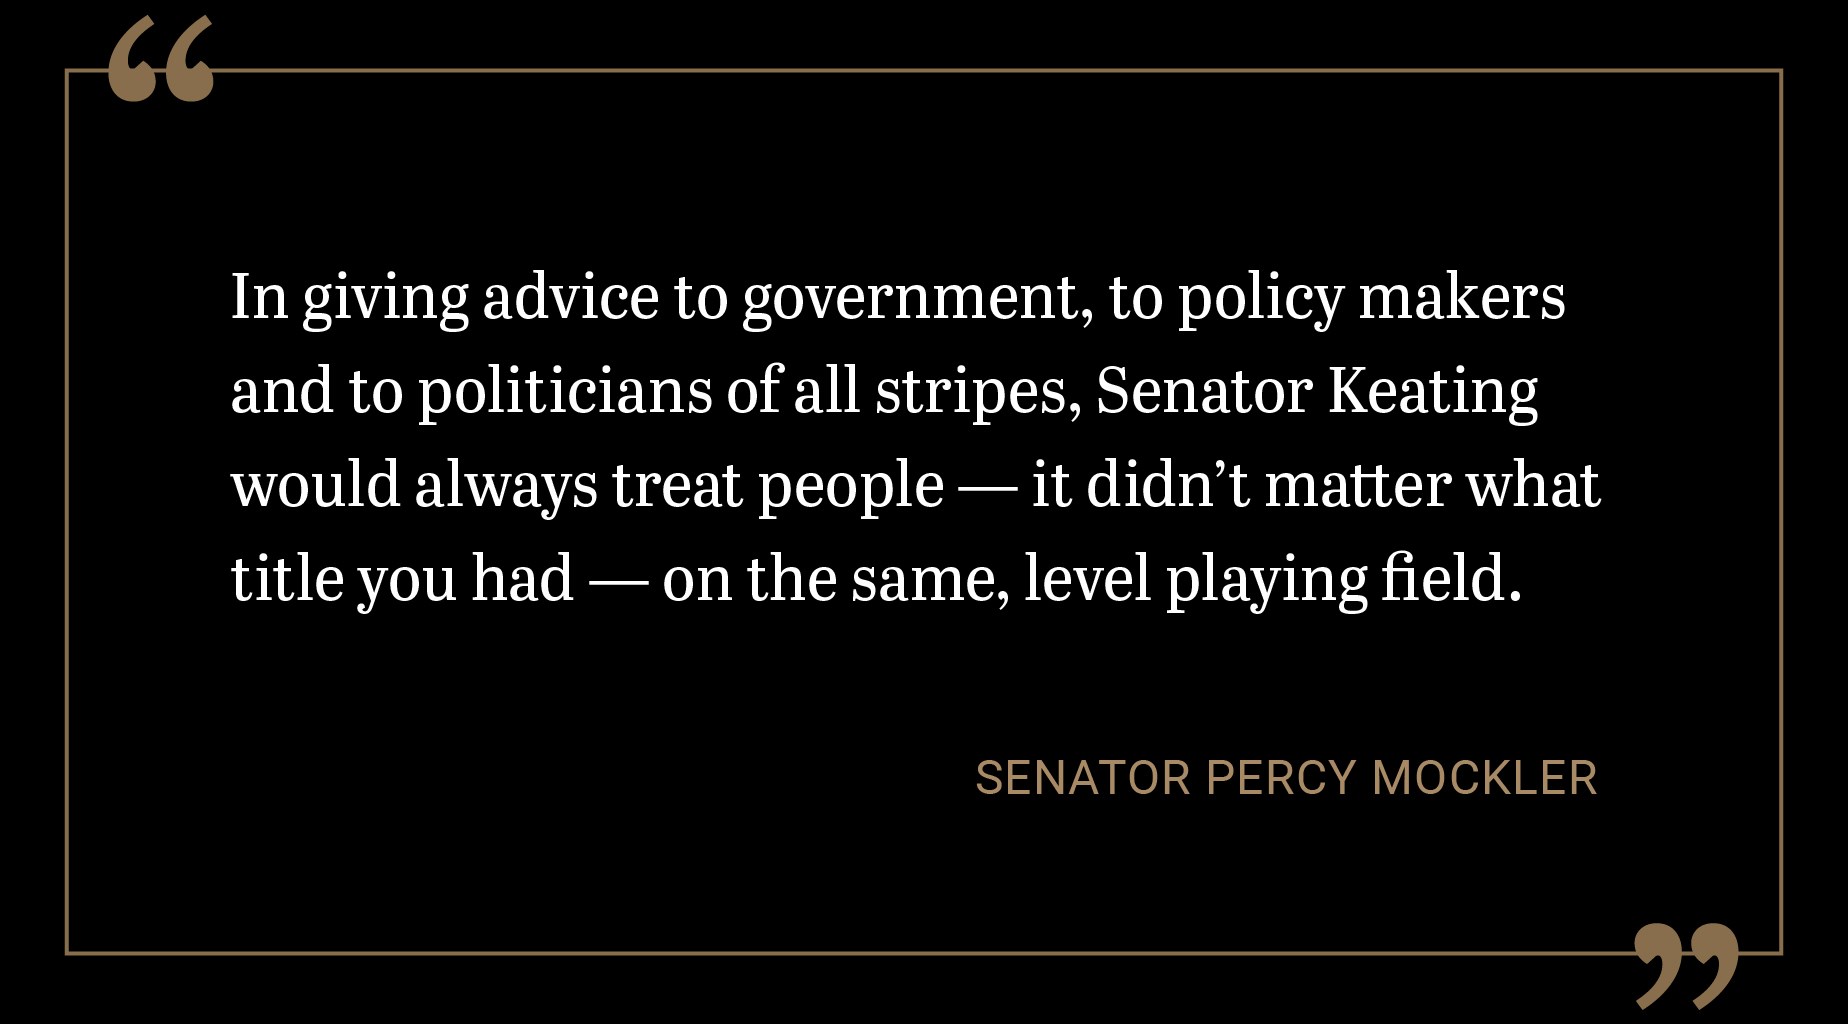 In giving advice to government, to policy makers and to politicians of all stripes, Senator Keating would always treat people — it didn’t matter what title you had — on the same, level playing field.